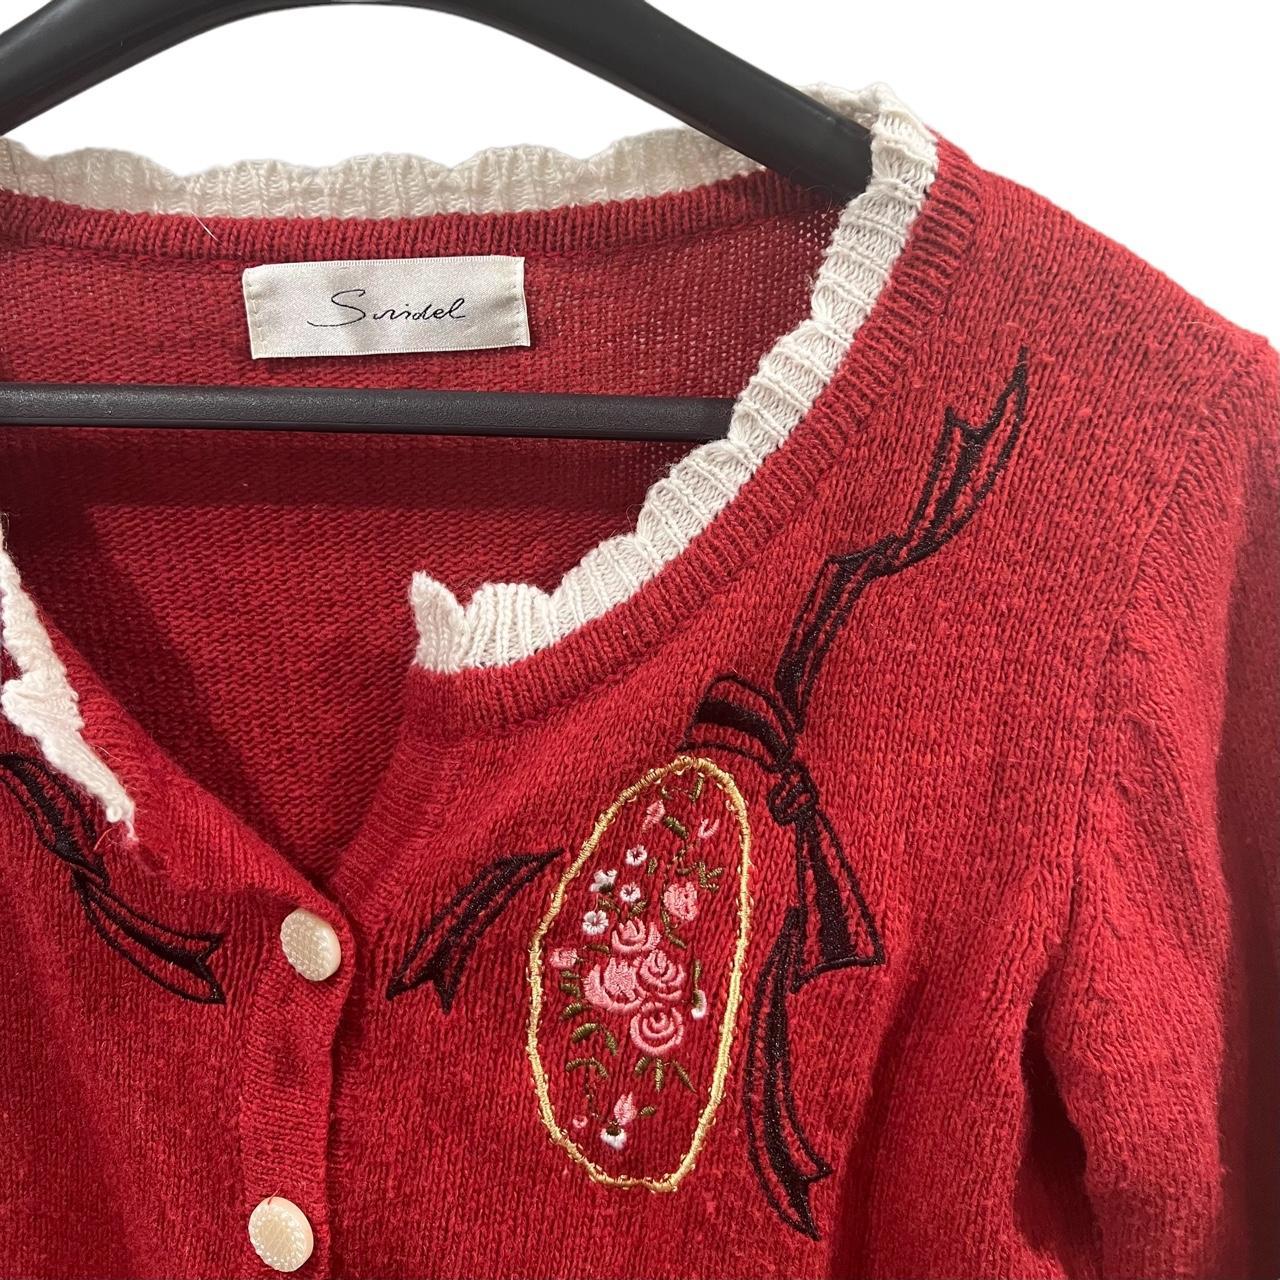 Product Image 3 - Vintage style red embroidered cardigan

Really